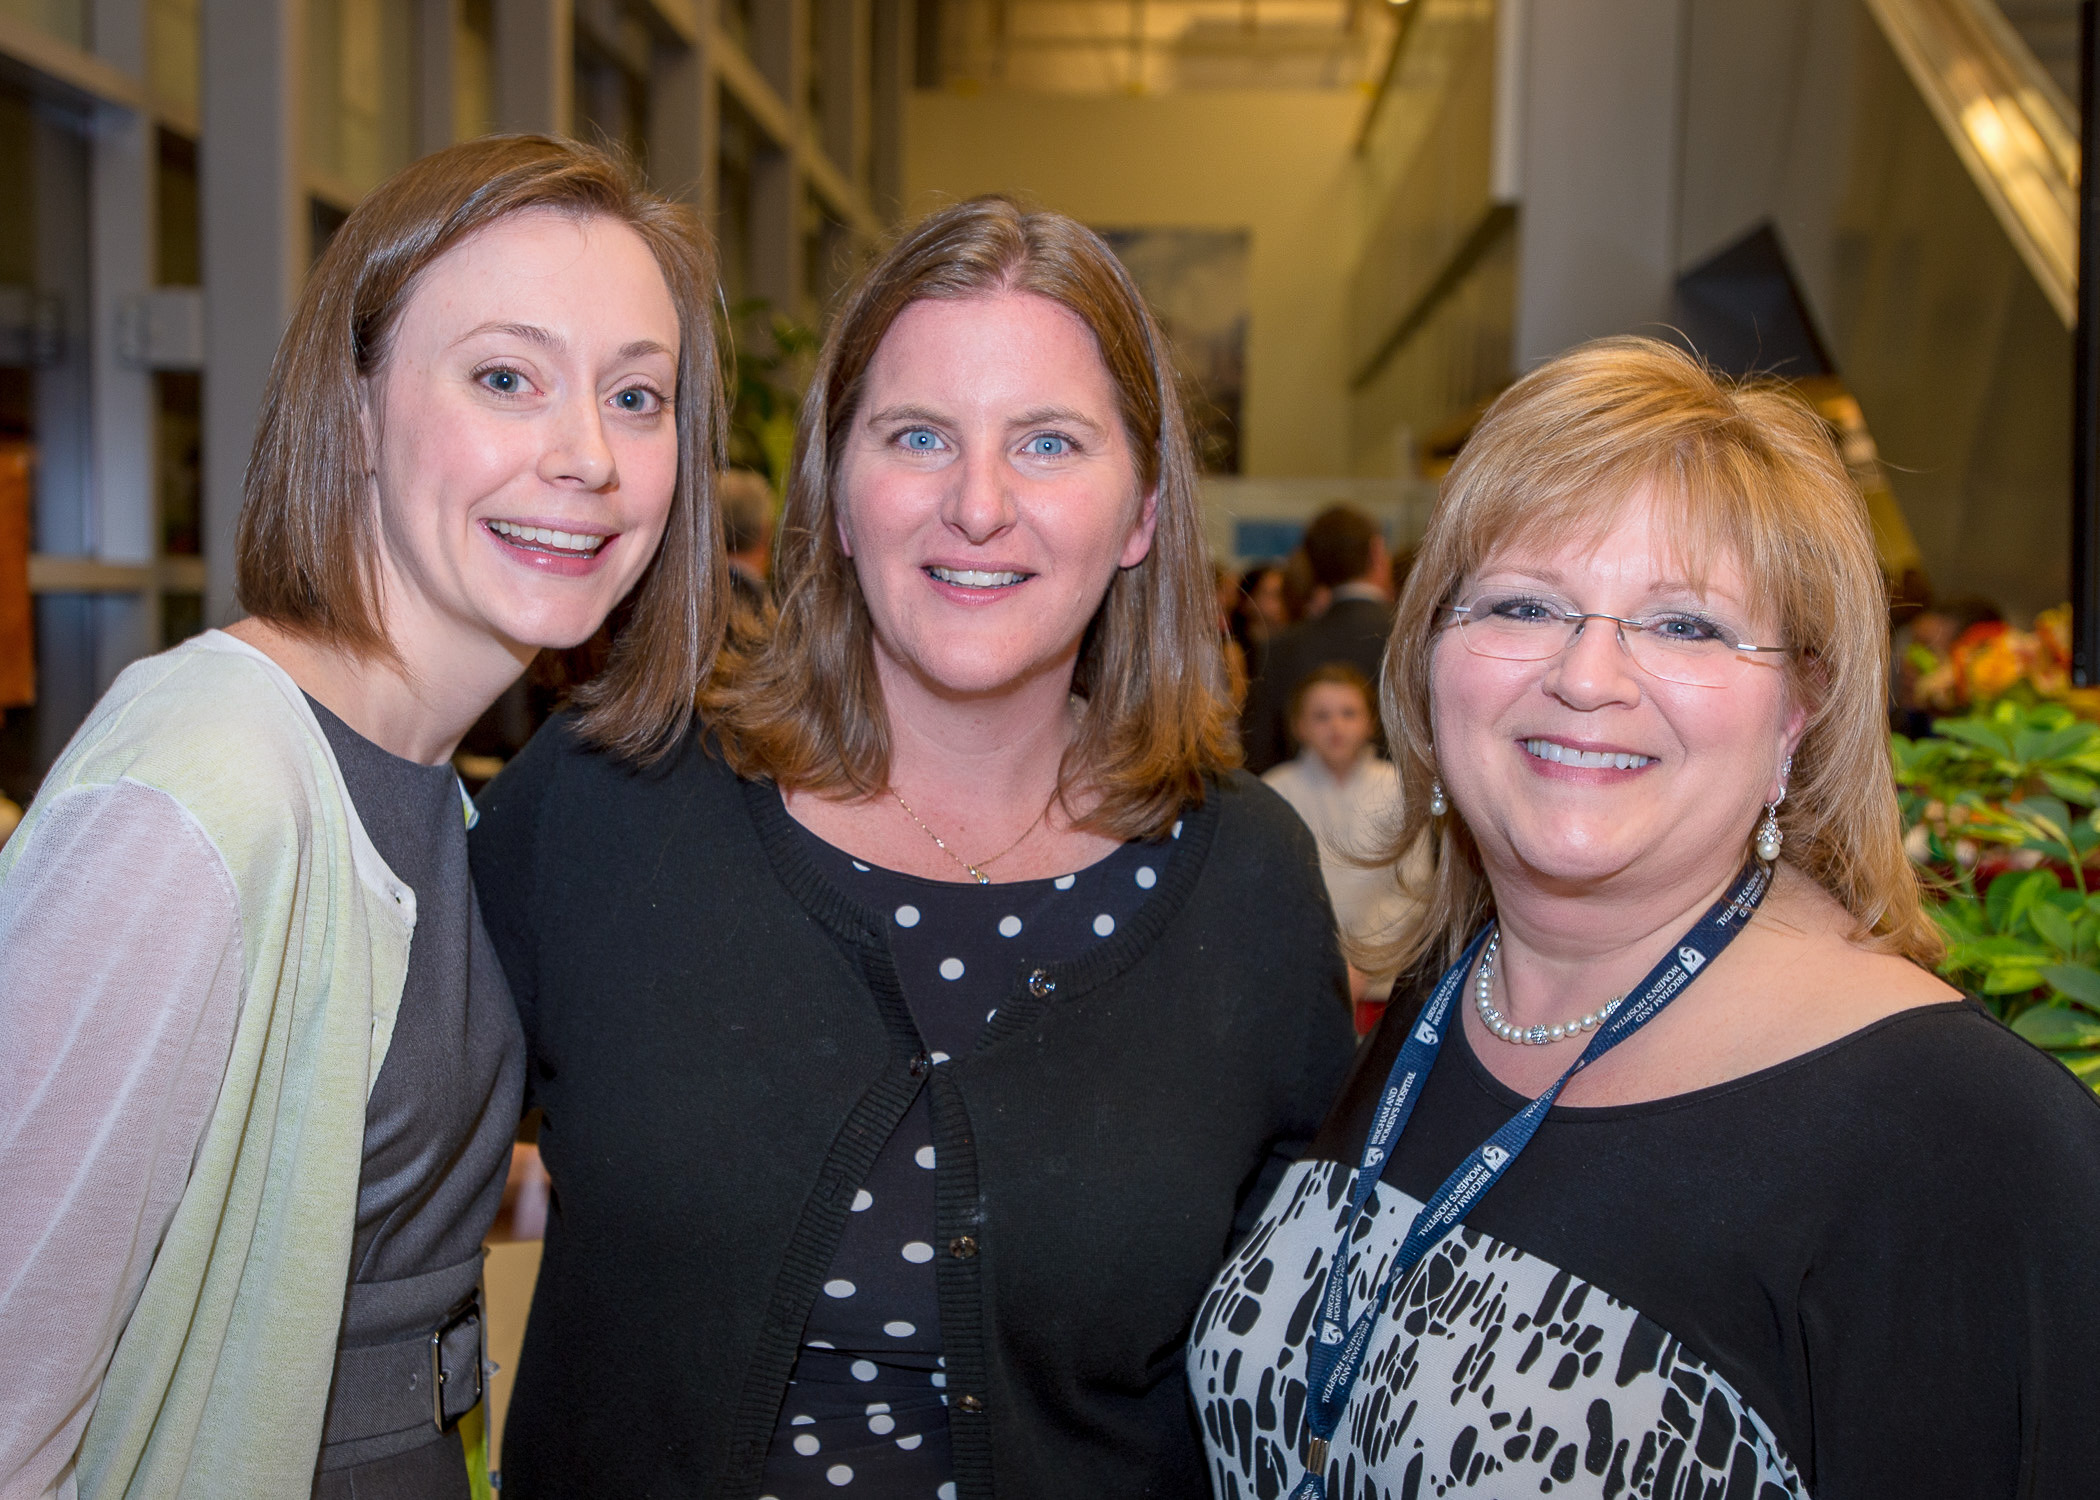 From left: 2015 PA Recognition Award recipients Courtney Moller, Shauna Curran and Genina Salvio